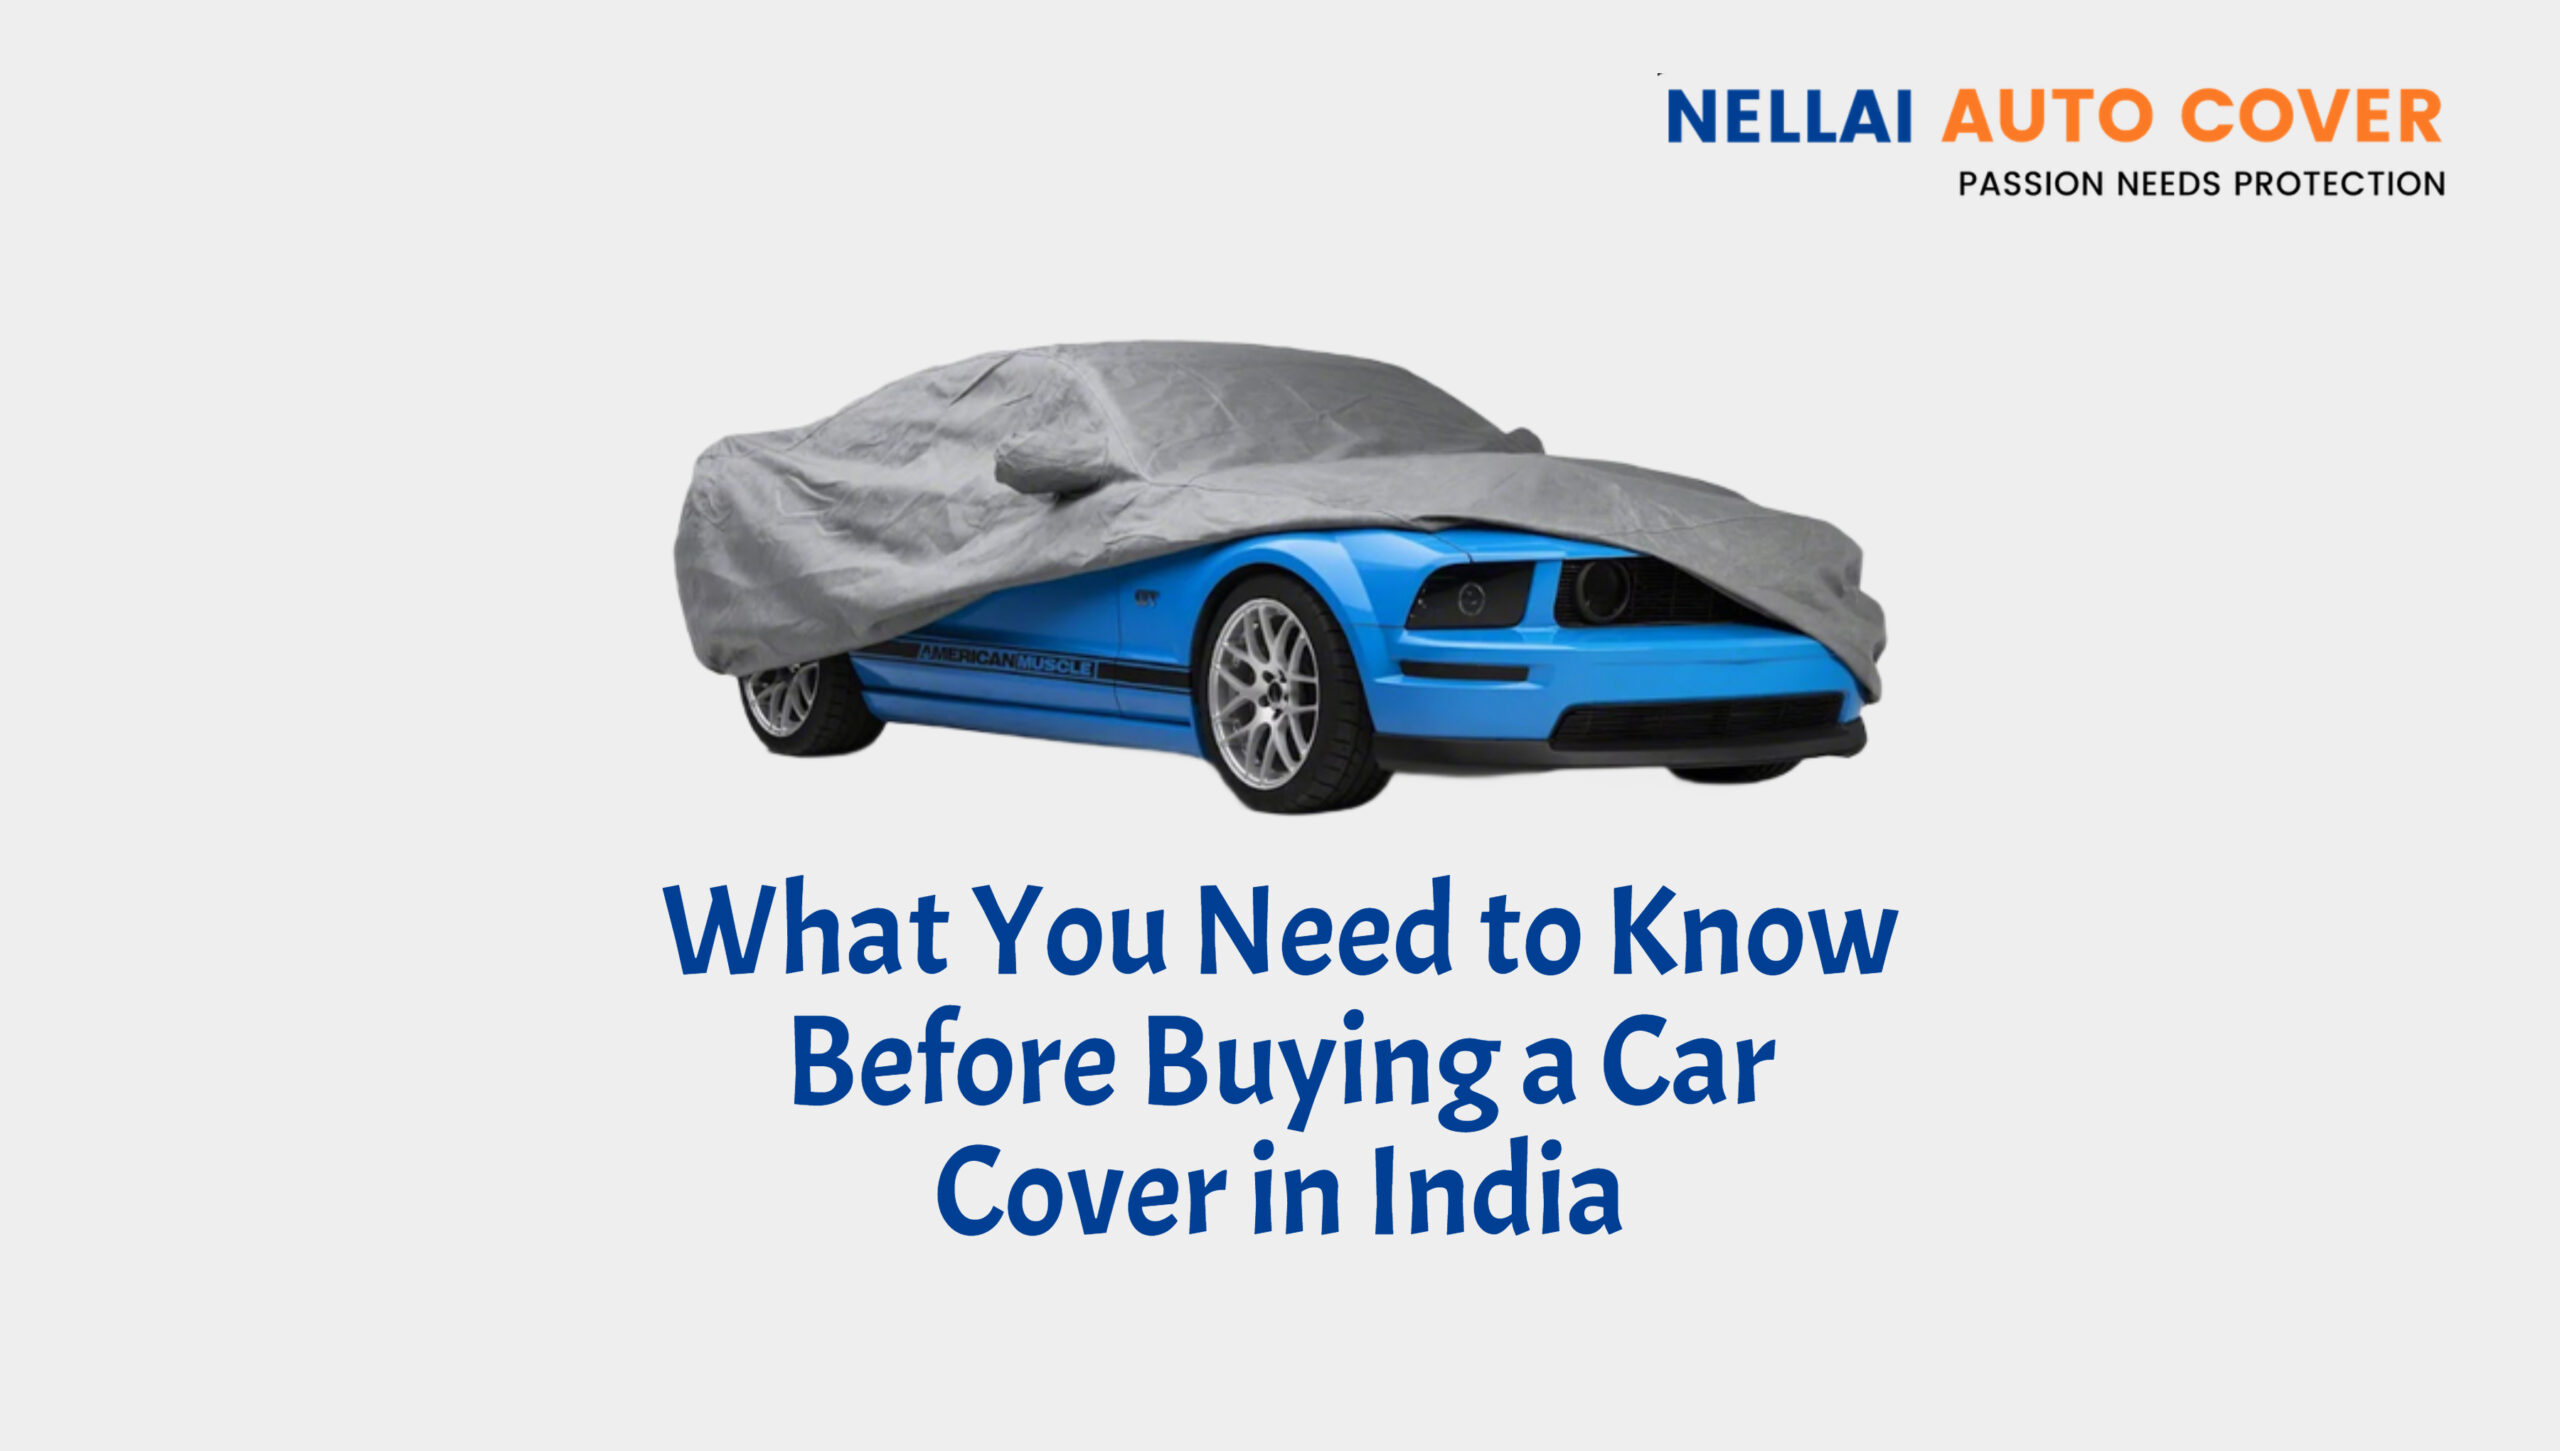 What You Need to Know Before Buying a Car Cover in India